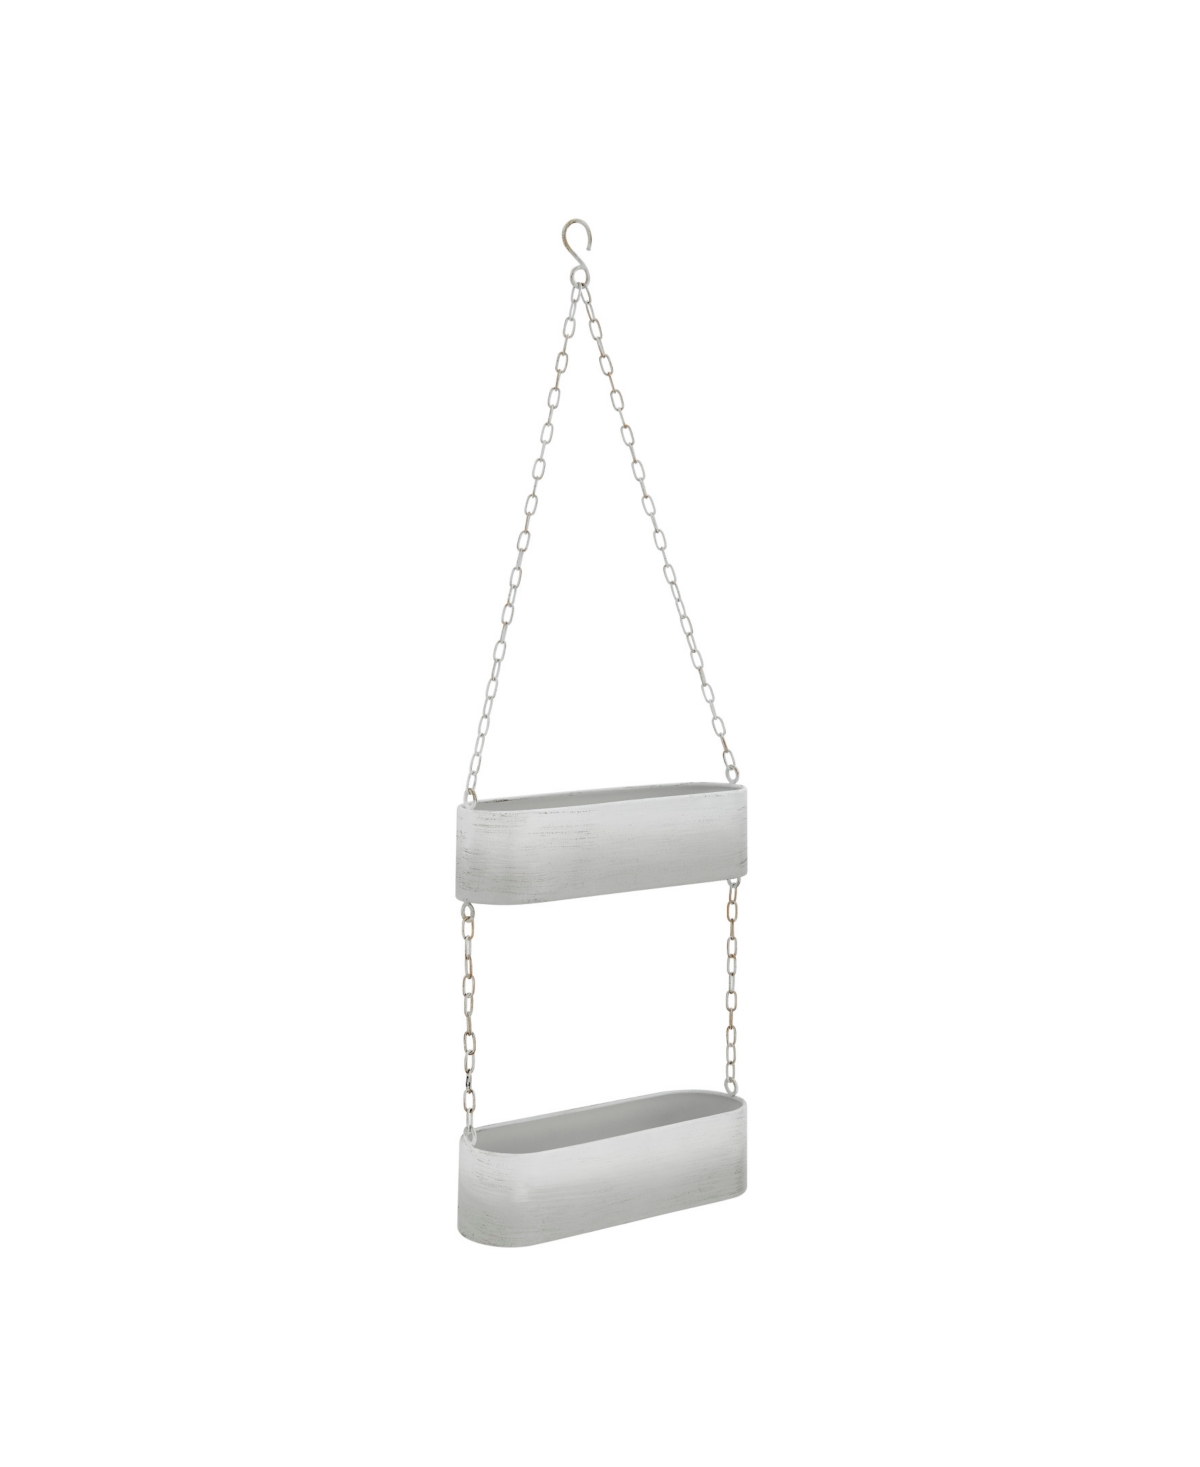 Two-Tier Hanging Metal Trough Wall Planter - White